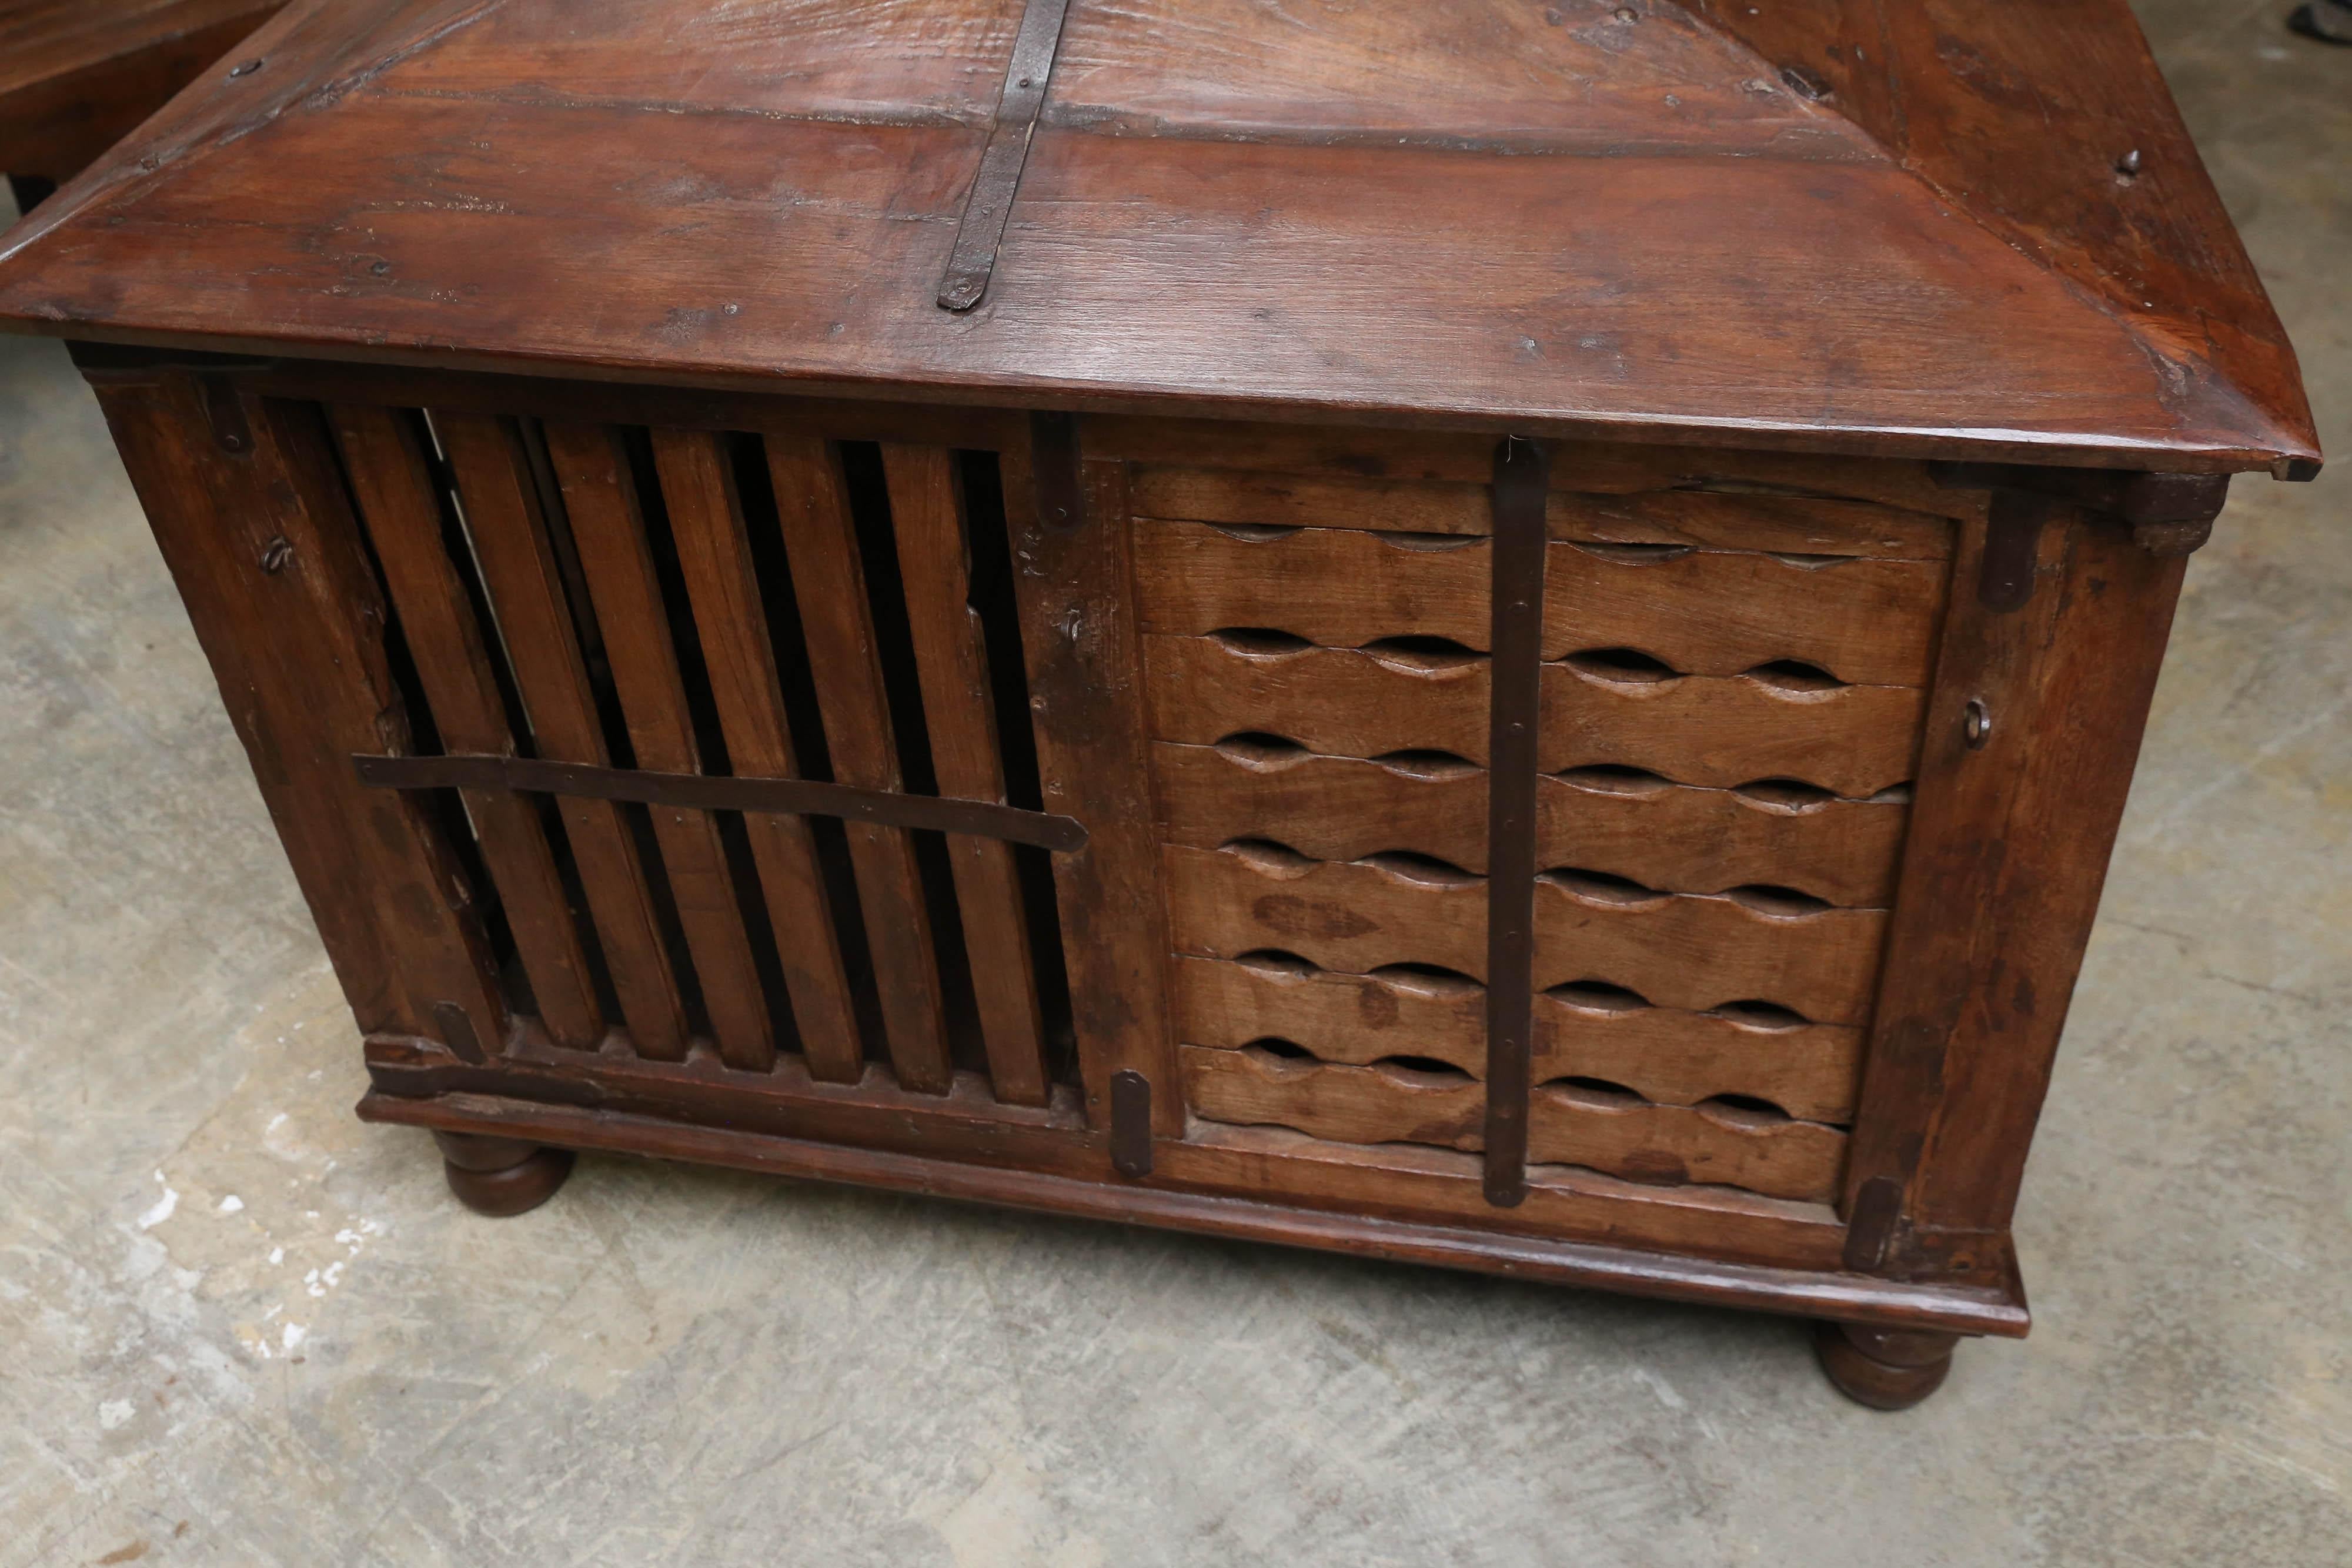 19th Century Grand 1890s Reinforced Solid Teak Wood Dog House from a Settler's Home For Sale